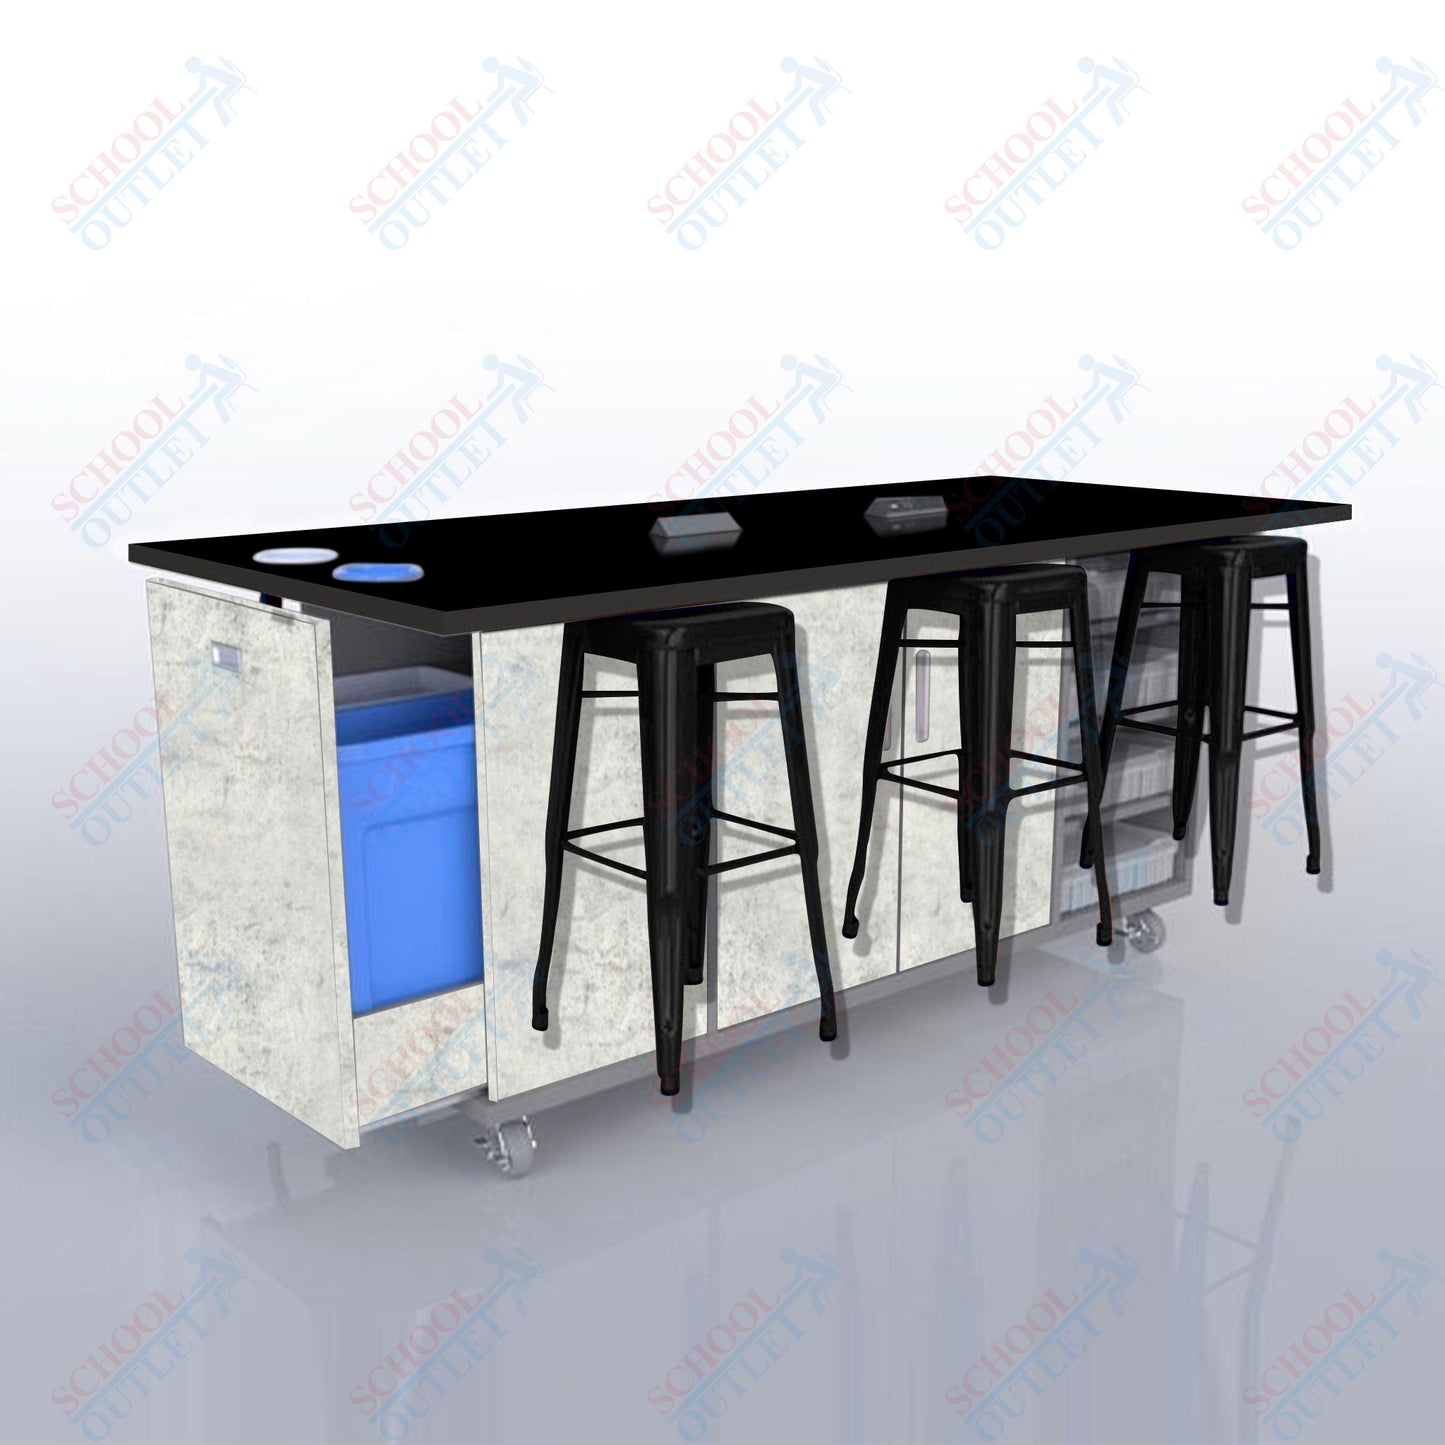 CEF ED Original Table 36"H High Pressure Laminate Top, Laminate Base with  6 Stools, Storage Bins, Trash Bins, and Electrical Outlets Included.